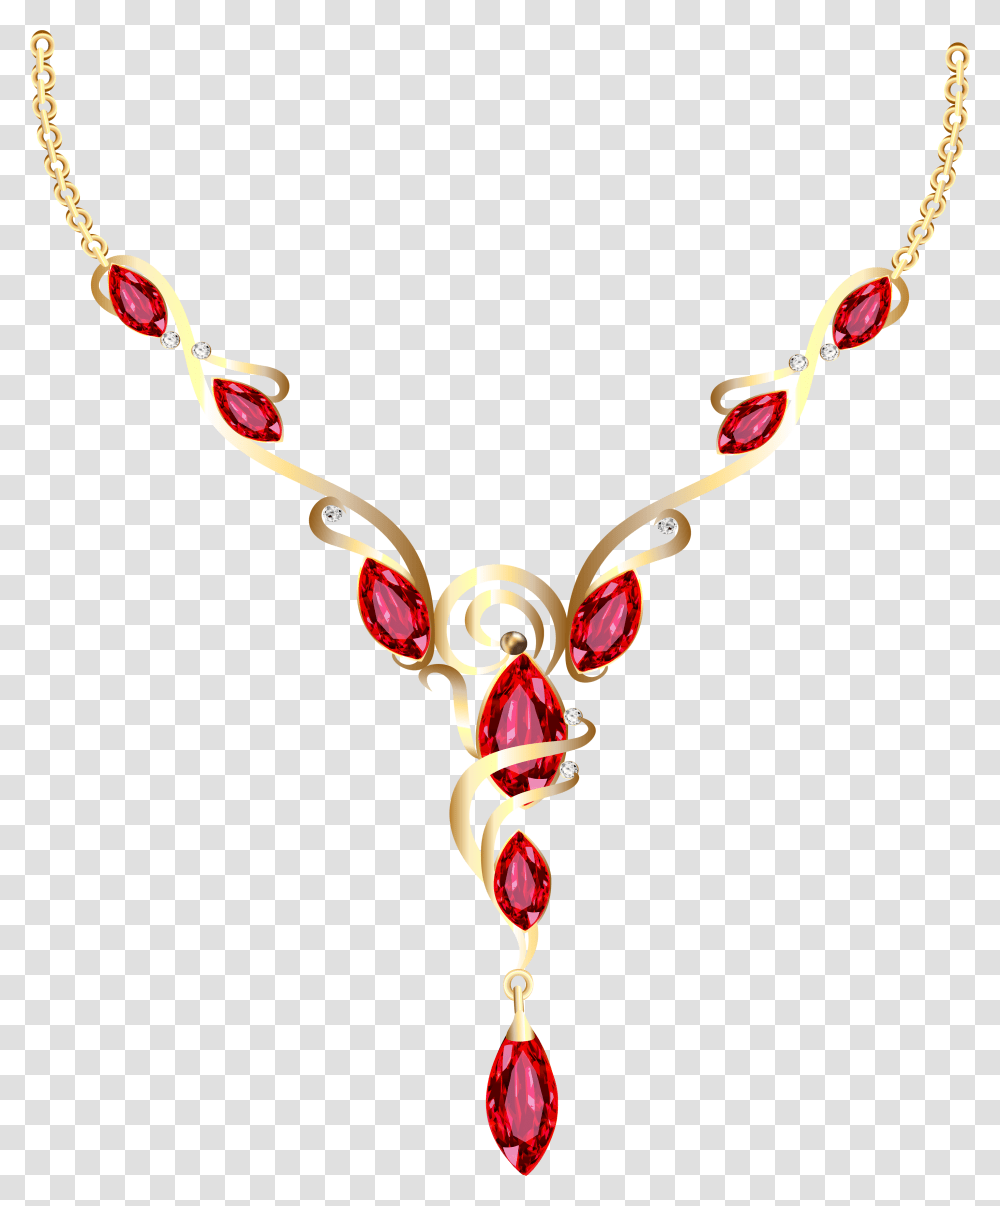 Jewelry Images Free Download Ring Earnings, Necklace, Accessories, Accessory, Pendant Transparent Png